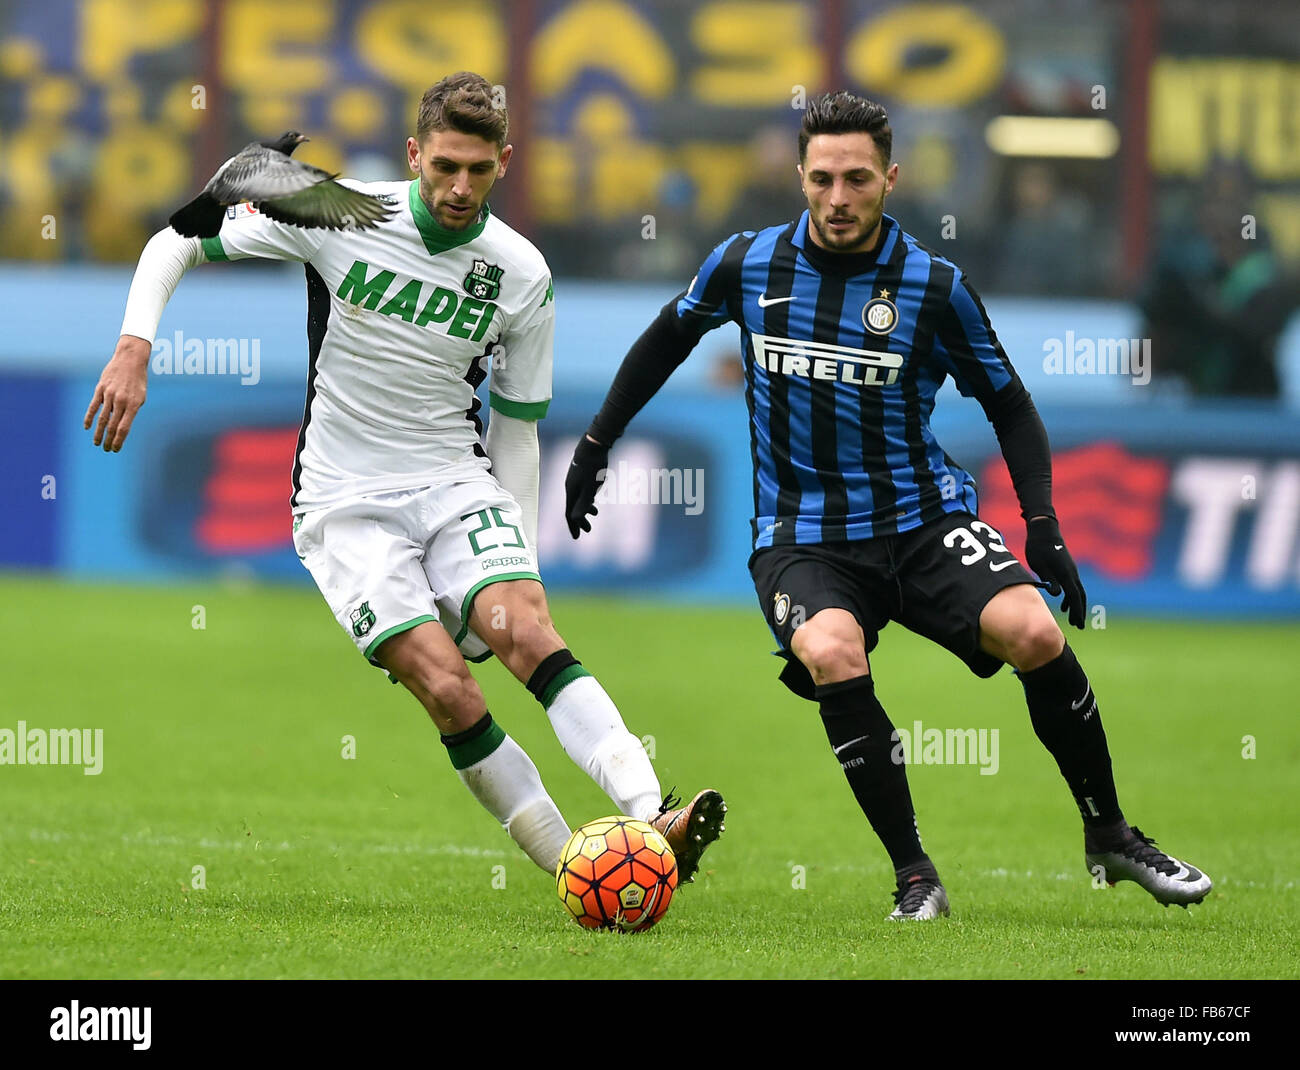 Inter milan r hi-res stock photography and images - Alamy